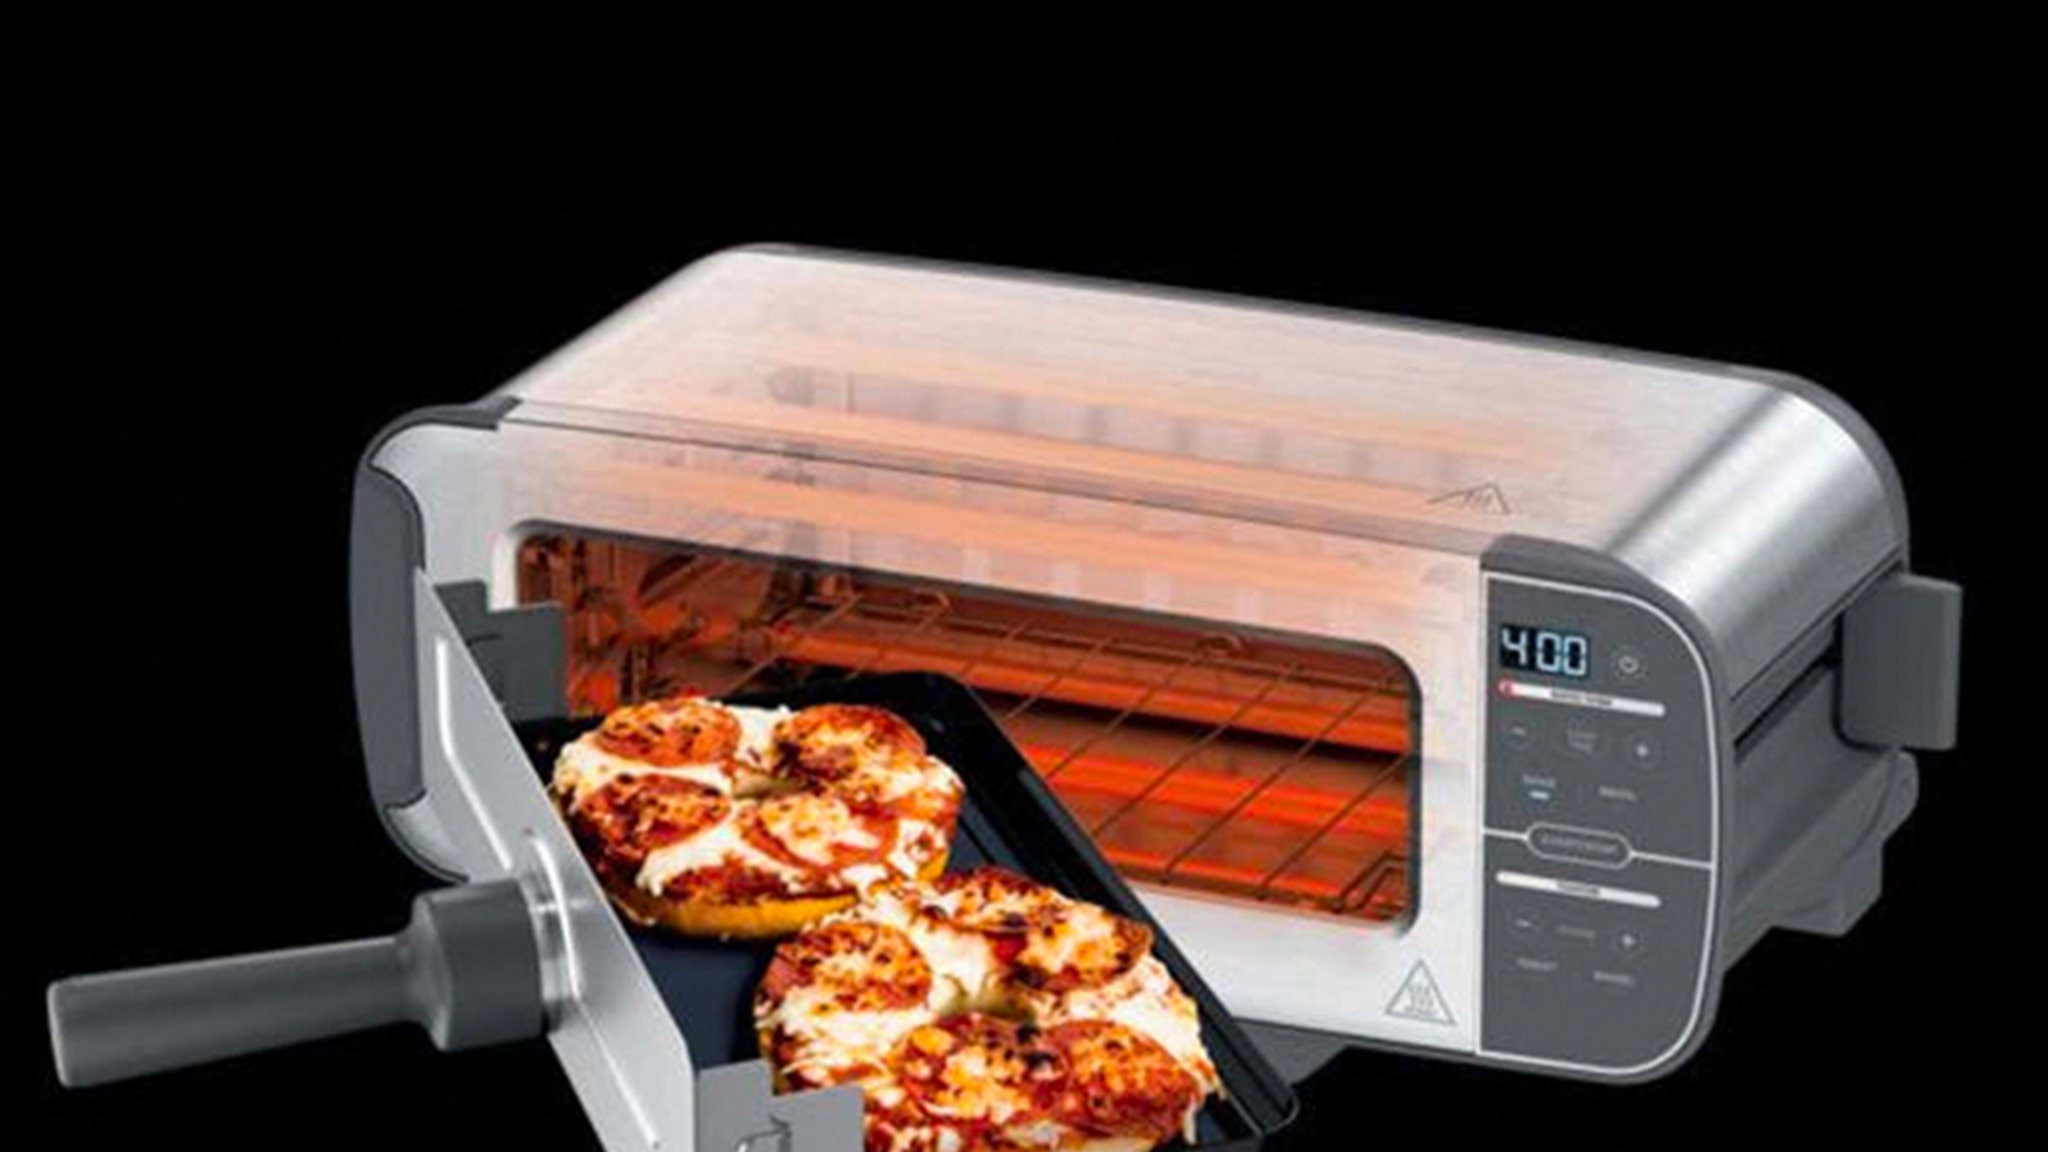 space saver toaster ovens